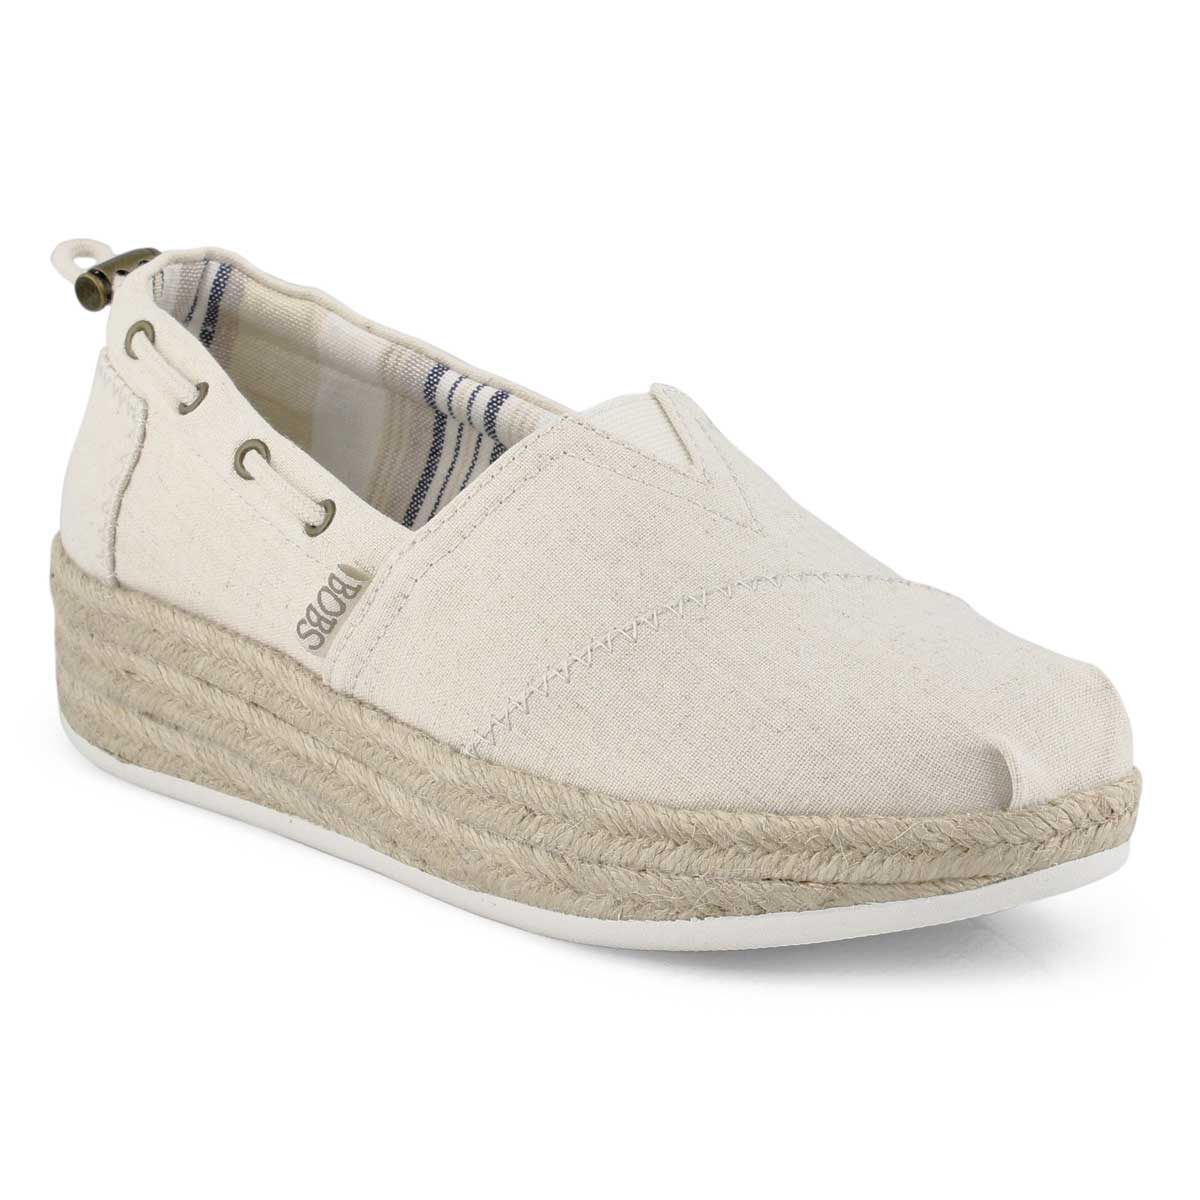 bobs wedges by skechers